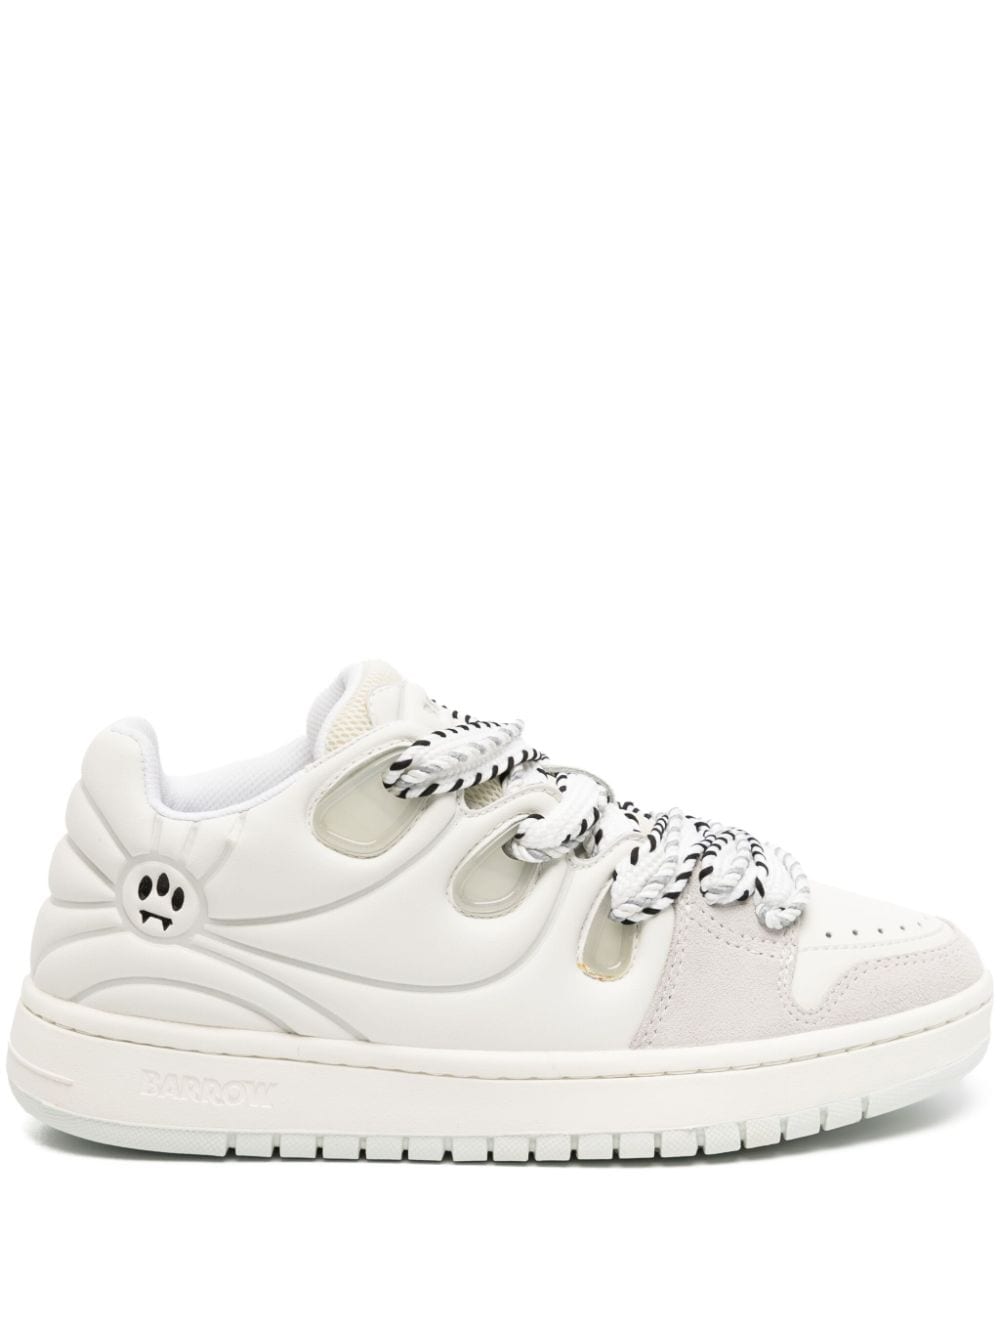 Barrow Ollie Panelled Leather Sneakers In White